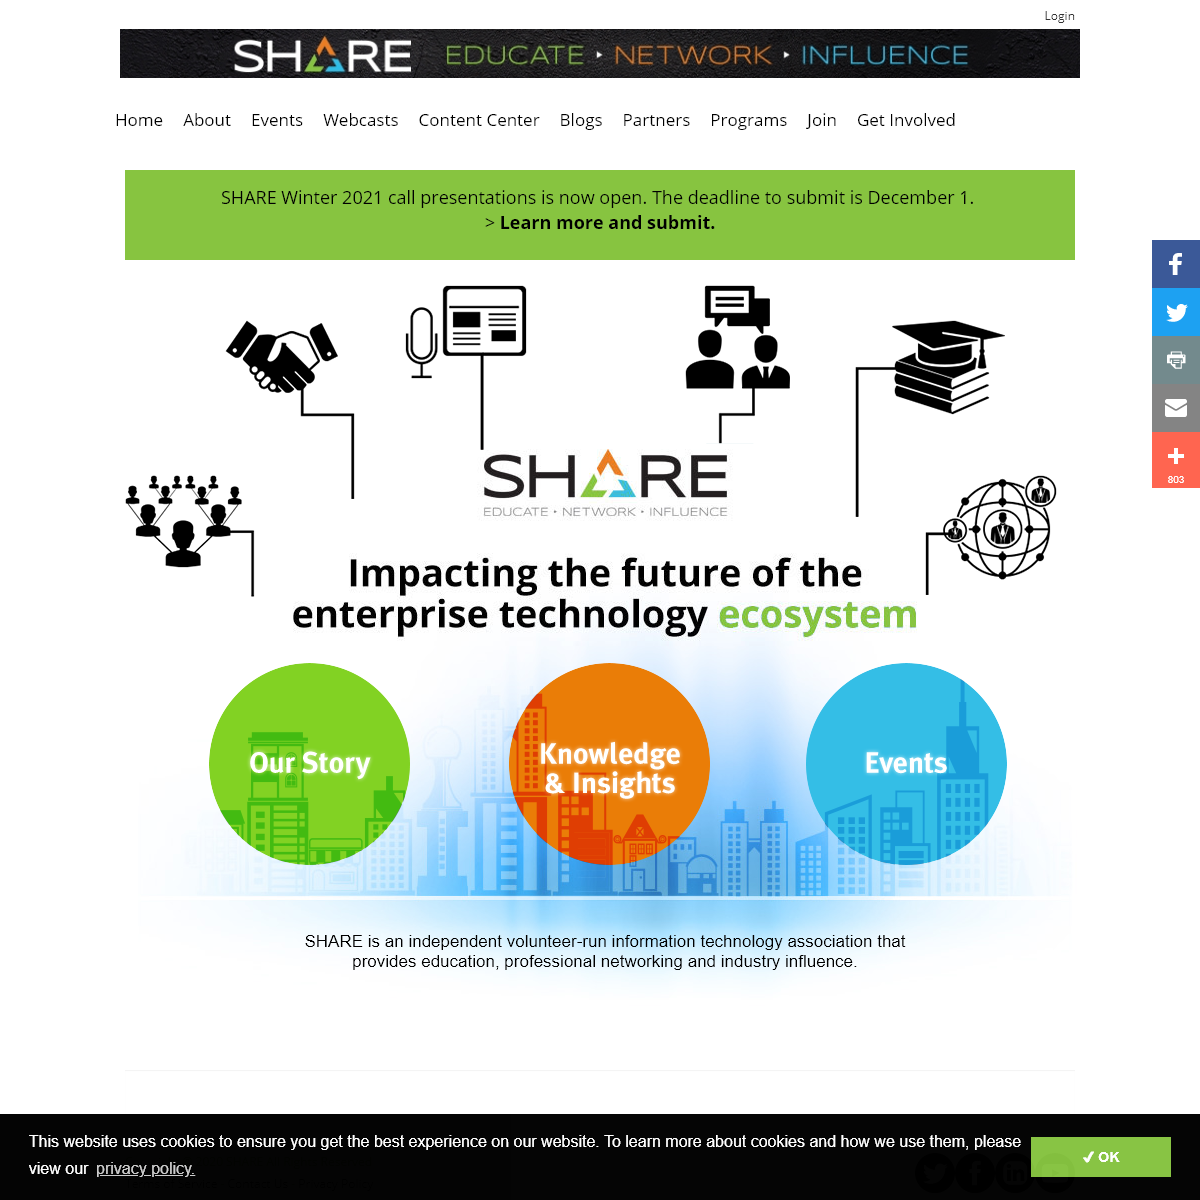 A complete backup of share.org